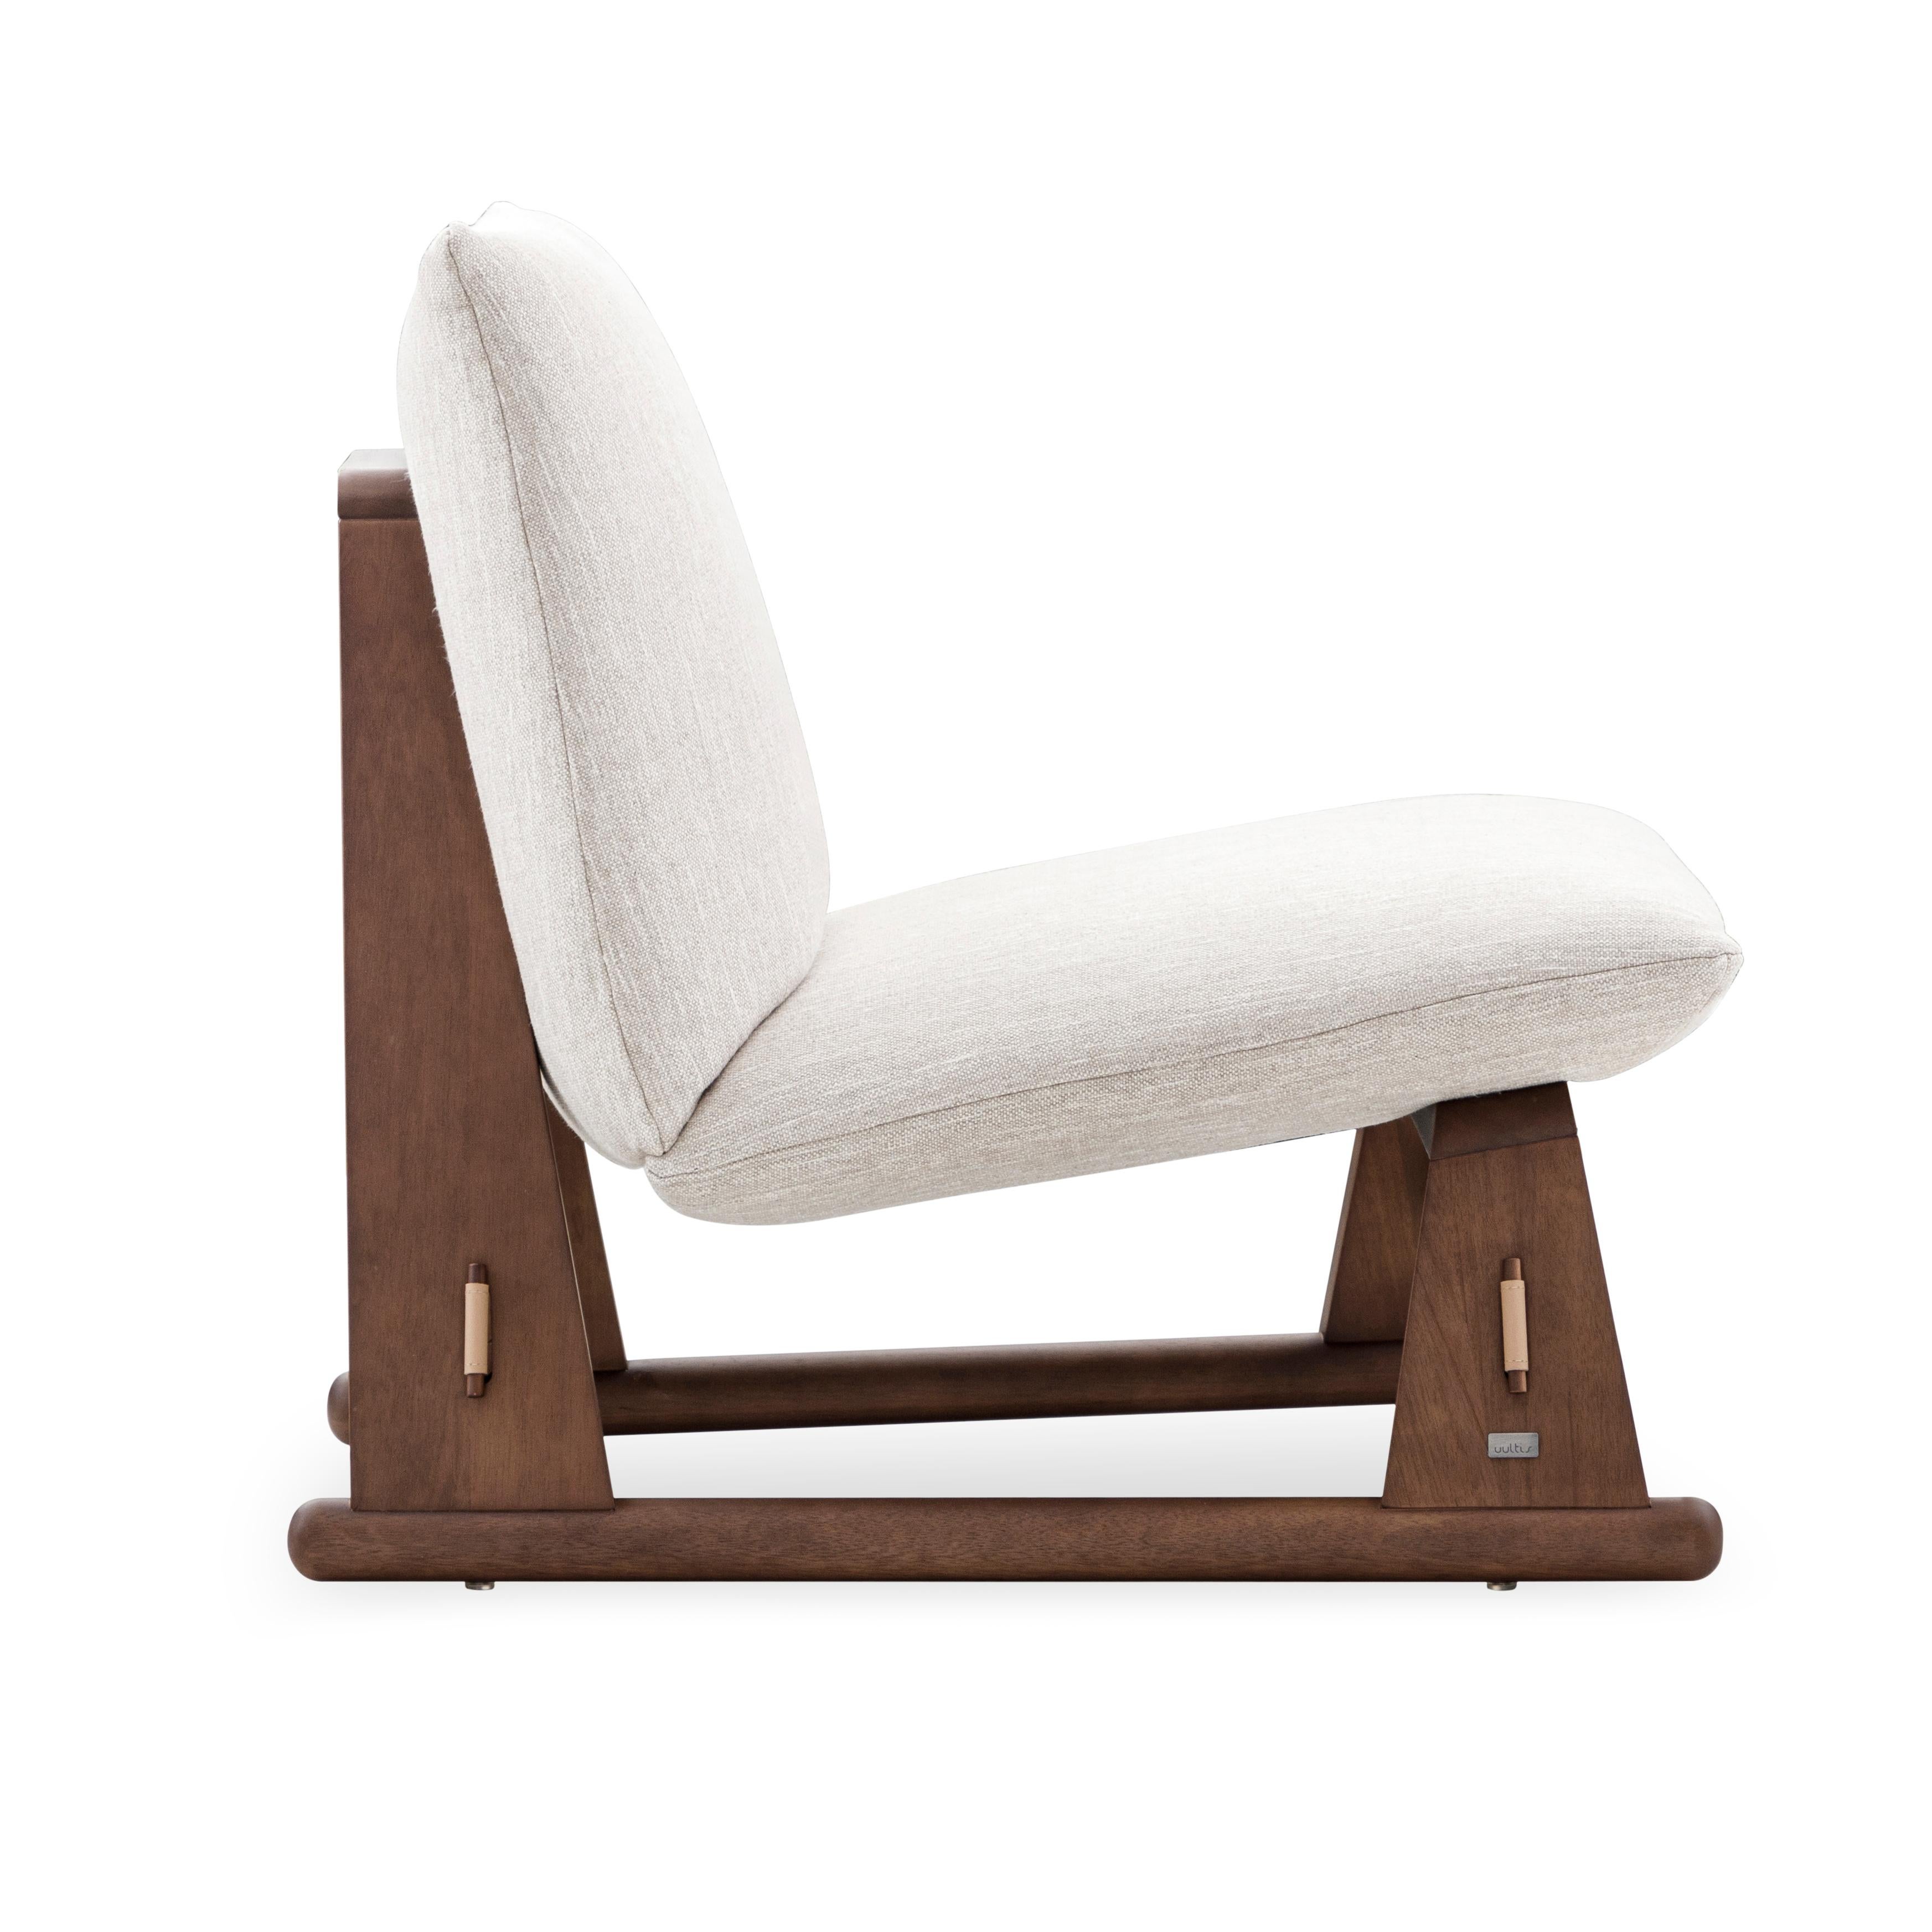 The Contemporary Maia chair is a new way to relax in its walnut wood finish and the upholstered off-white fabric that covers it. The Uultis team has created this chair with a seat and backrest that are made of MDF, it has elastic straps and a